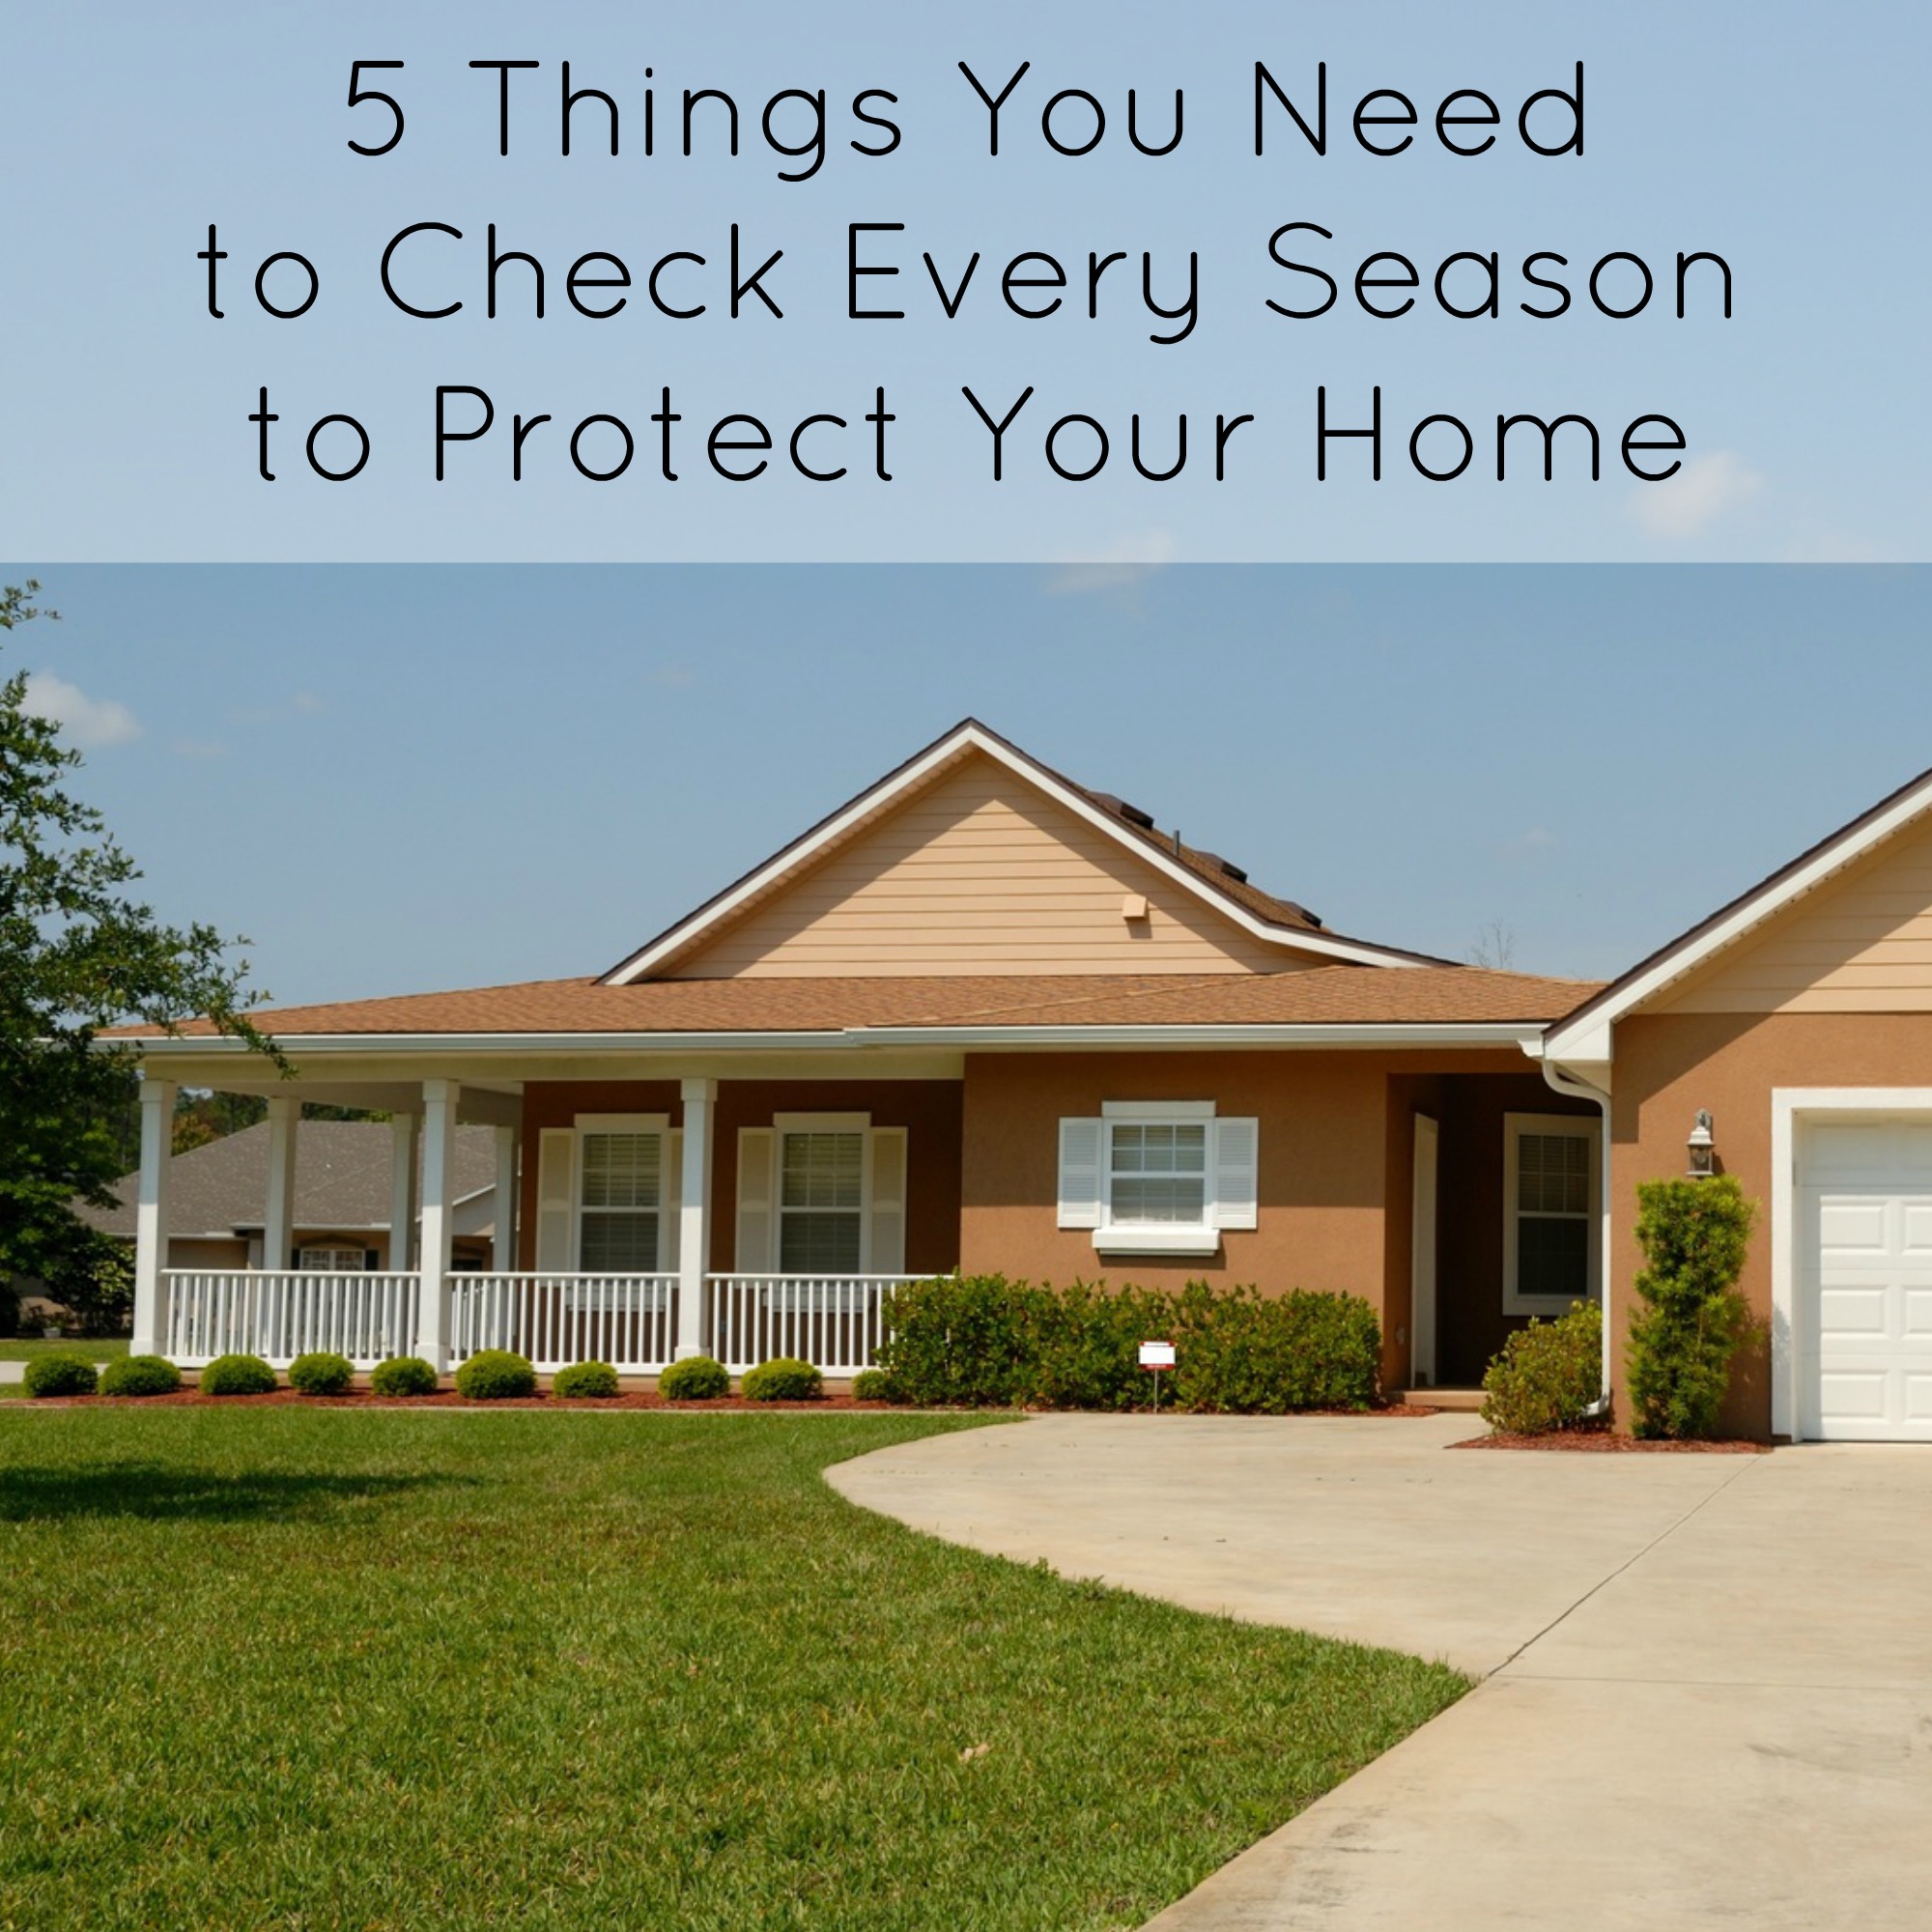 5 Things You Need to Check Every Season to Protect Your Home